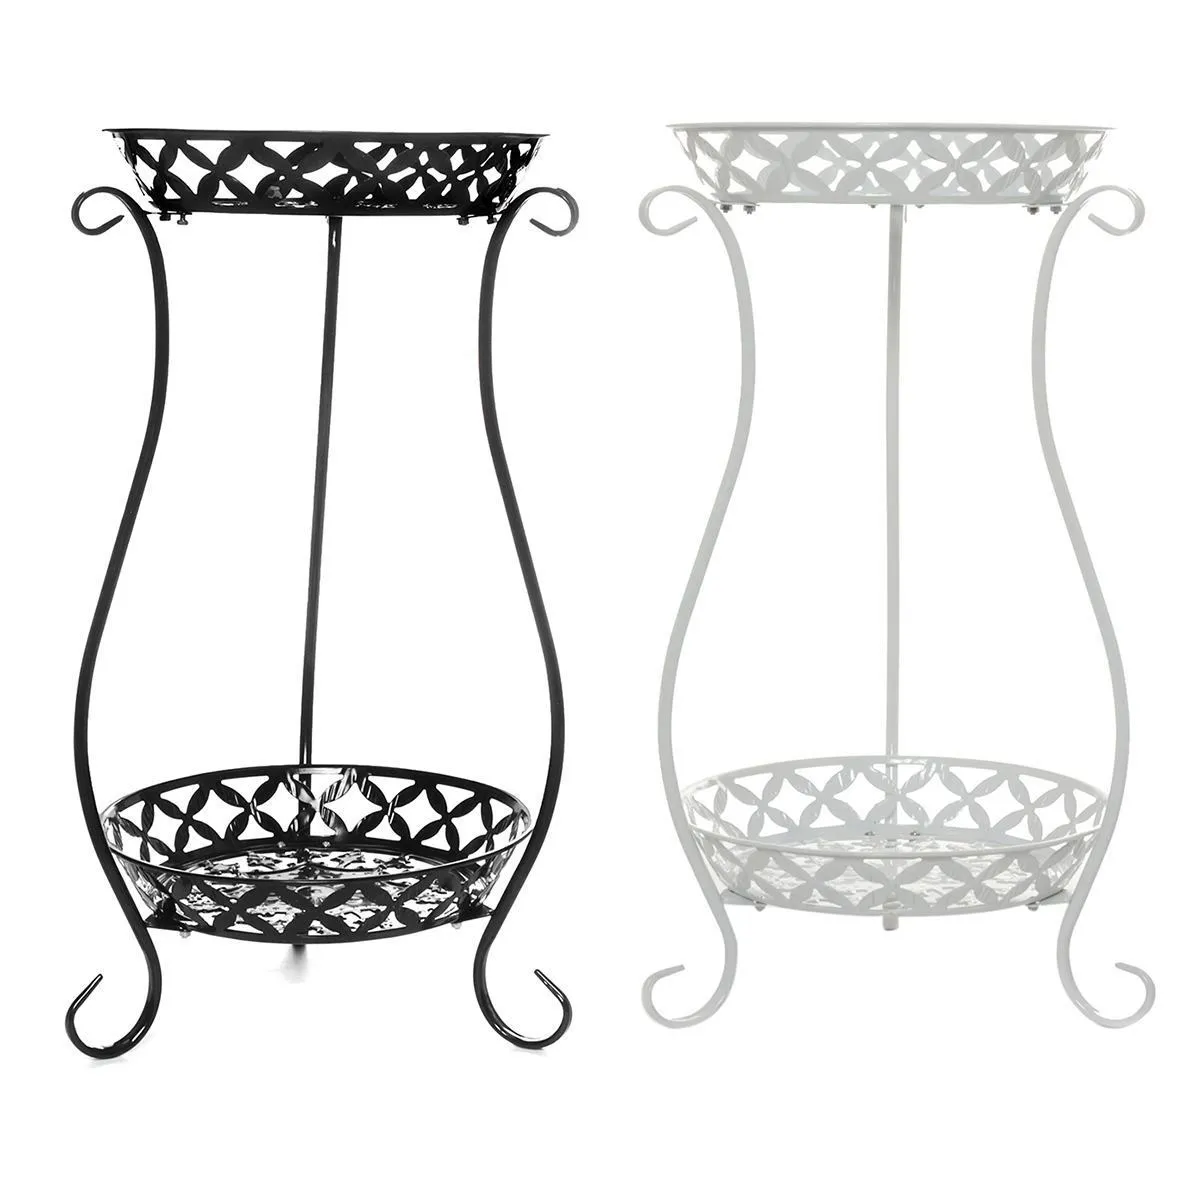 Wrought Iron Double-layer Plant Stand Flower Shelf for Rack Balcony Simple Indoor Living Room Coffee Bar Garden Flower Pot Shelf L285m